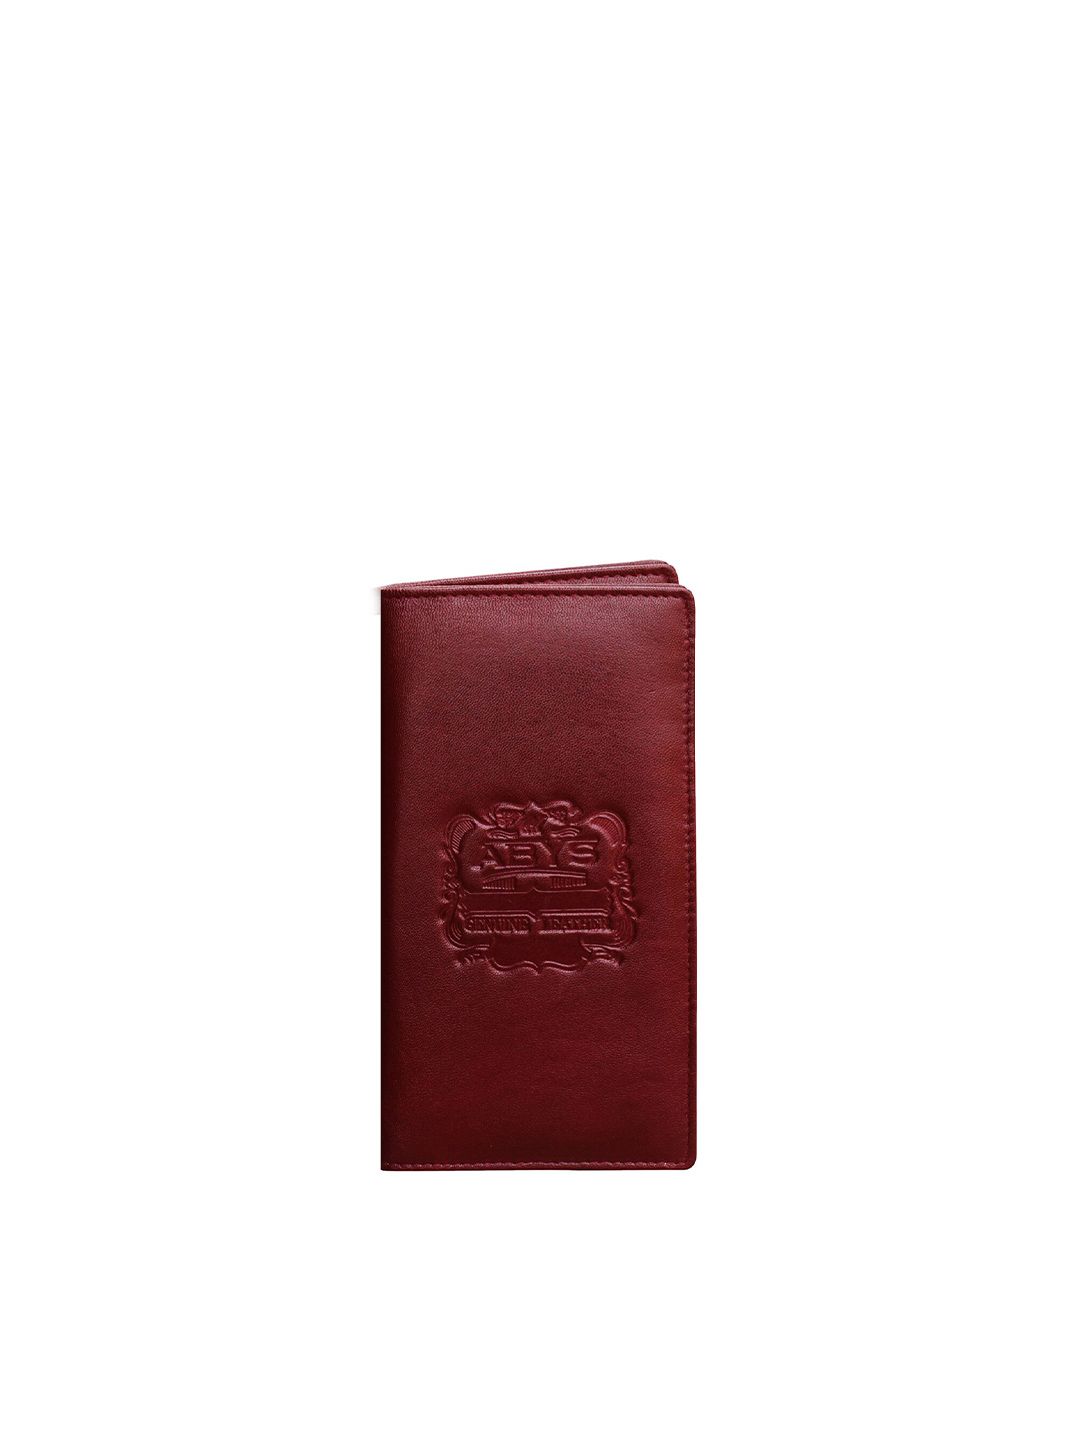 ABYS Unisex Brown & Black Textured Card Holder Price in India